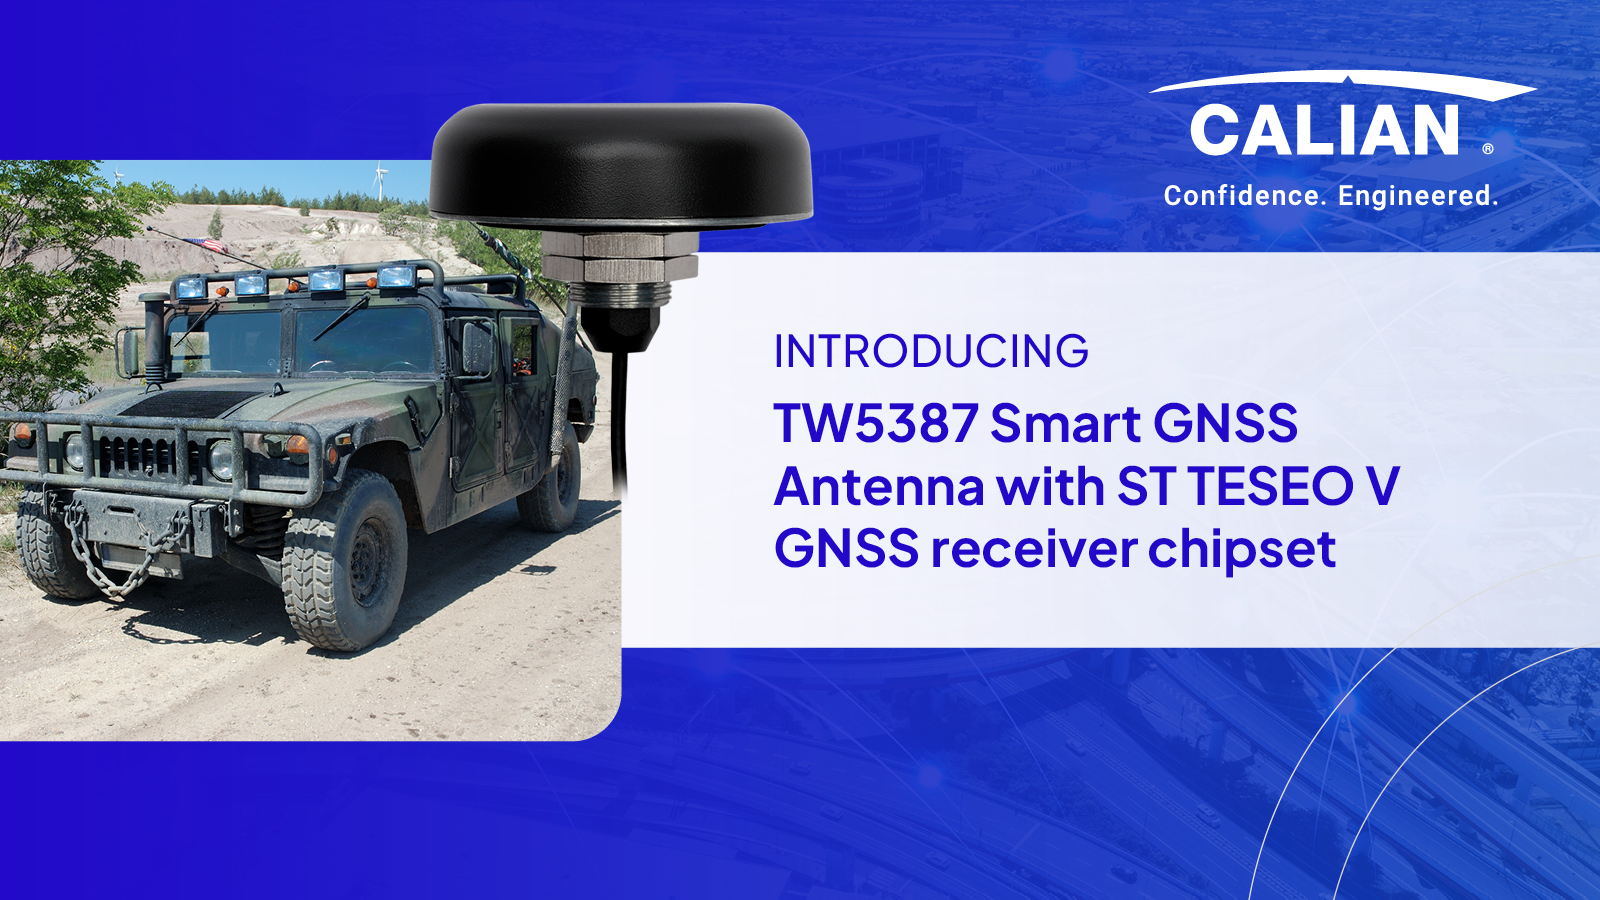 Calian introduces TW5387 Smart GNSS Antenna with ST TESEO V GNSS receiver chipset 